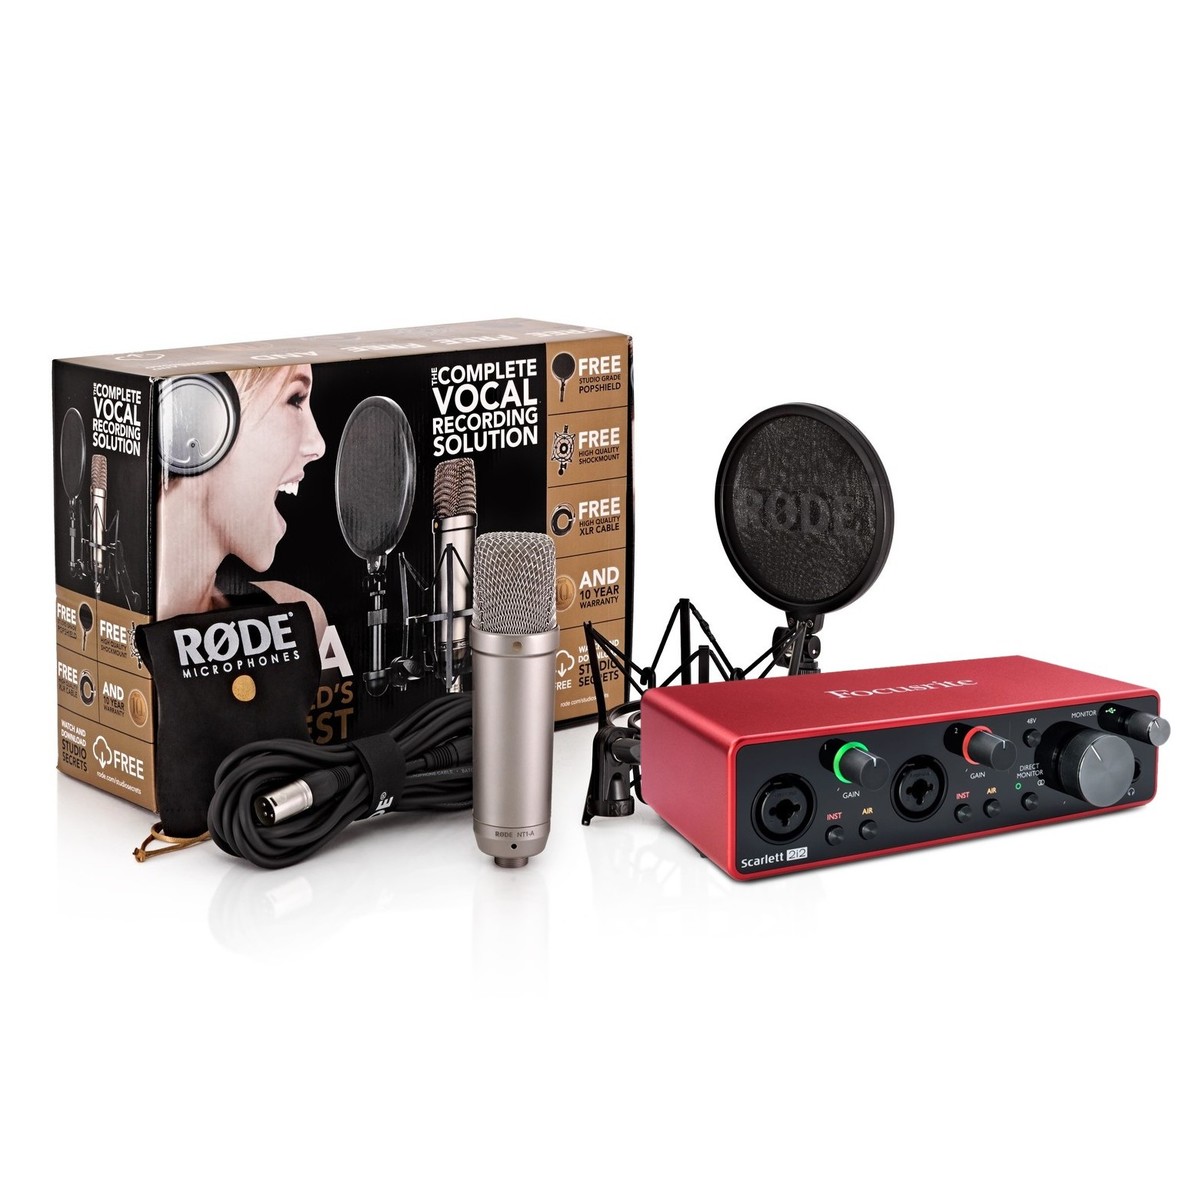 RODE NT1-A Complete Recording Kit with Interface, Headphones 